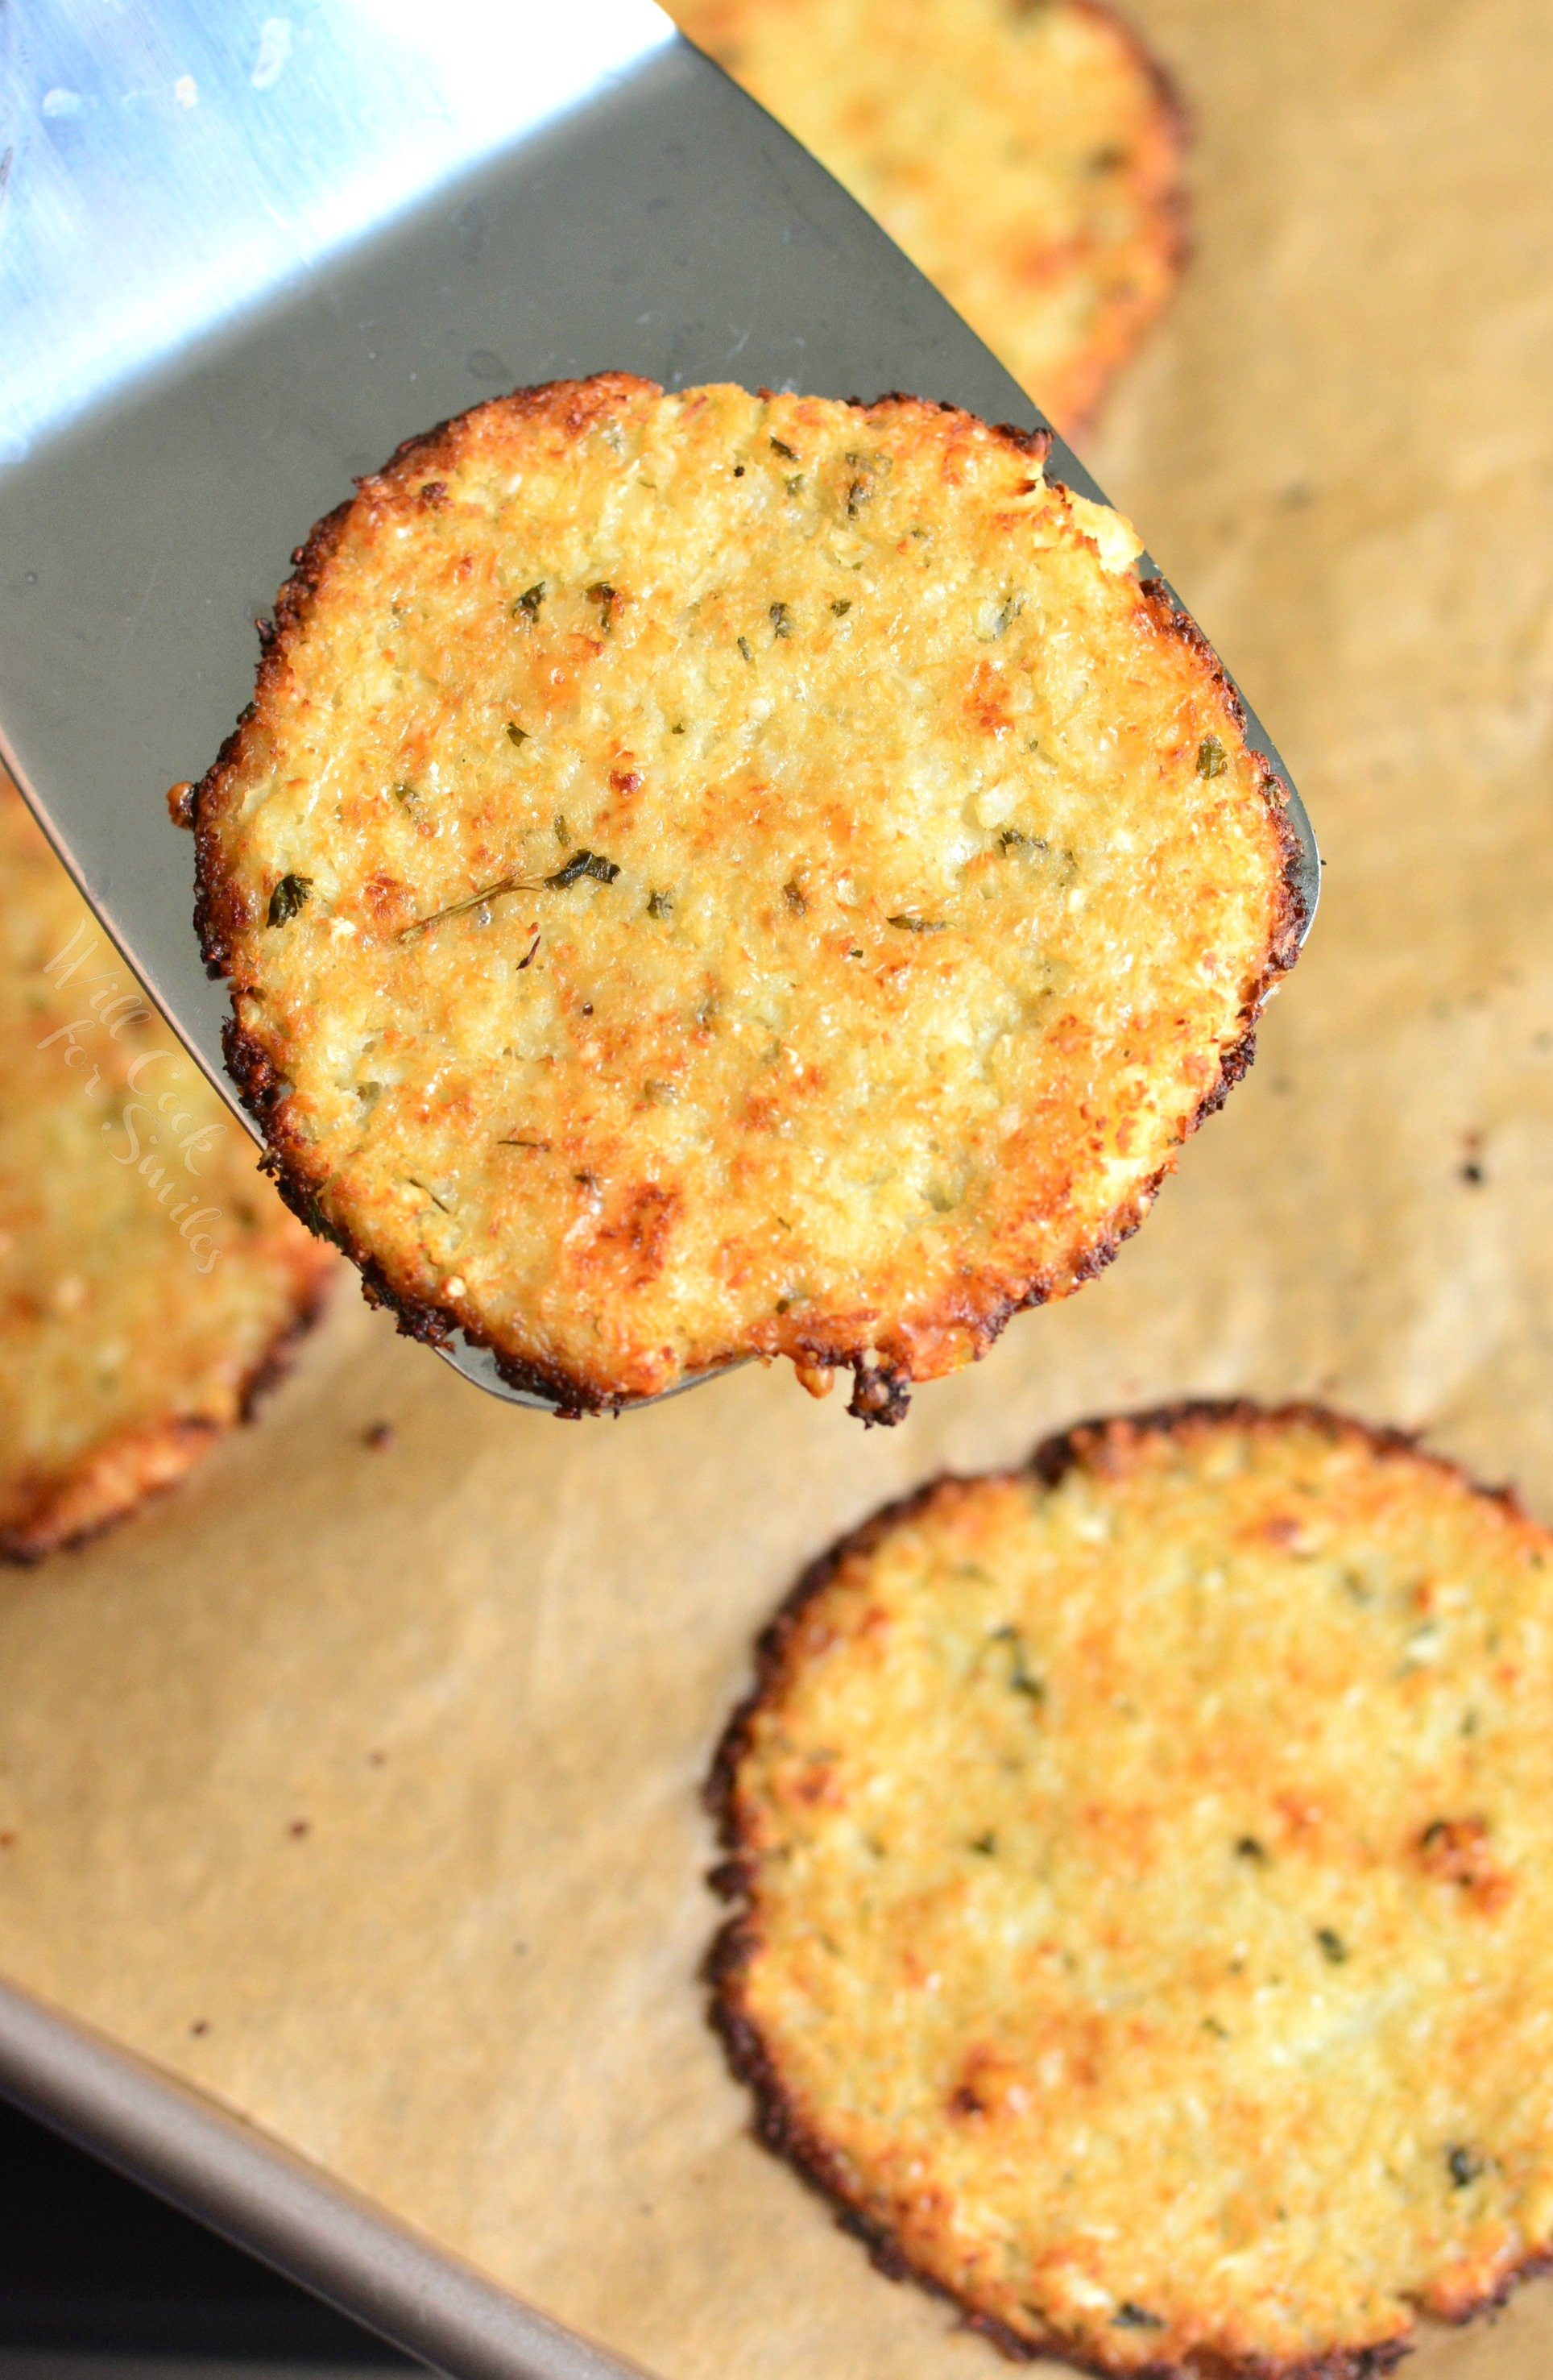 Cauliflower Parmesan Crisps. Amazing cauliflower snack that kids and adult will love. All you need is a head of cauliflower, block of Parmesan cheese, dry parsley flakes, and some garlic powder. #snack #cauliflower #parmesan 